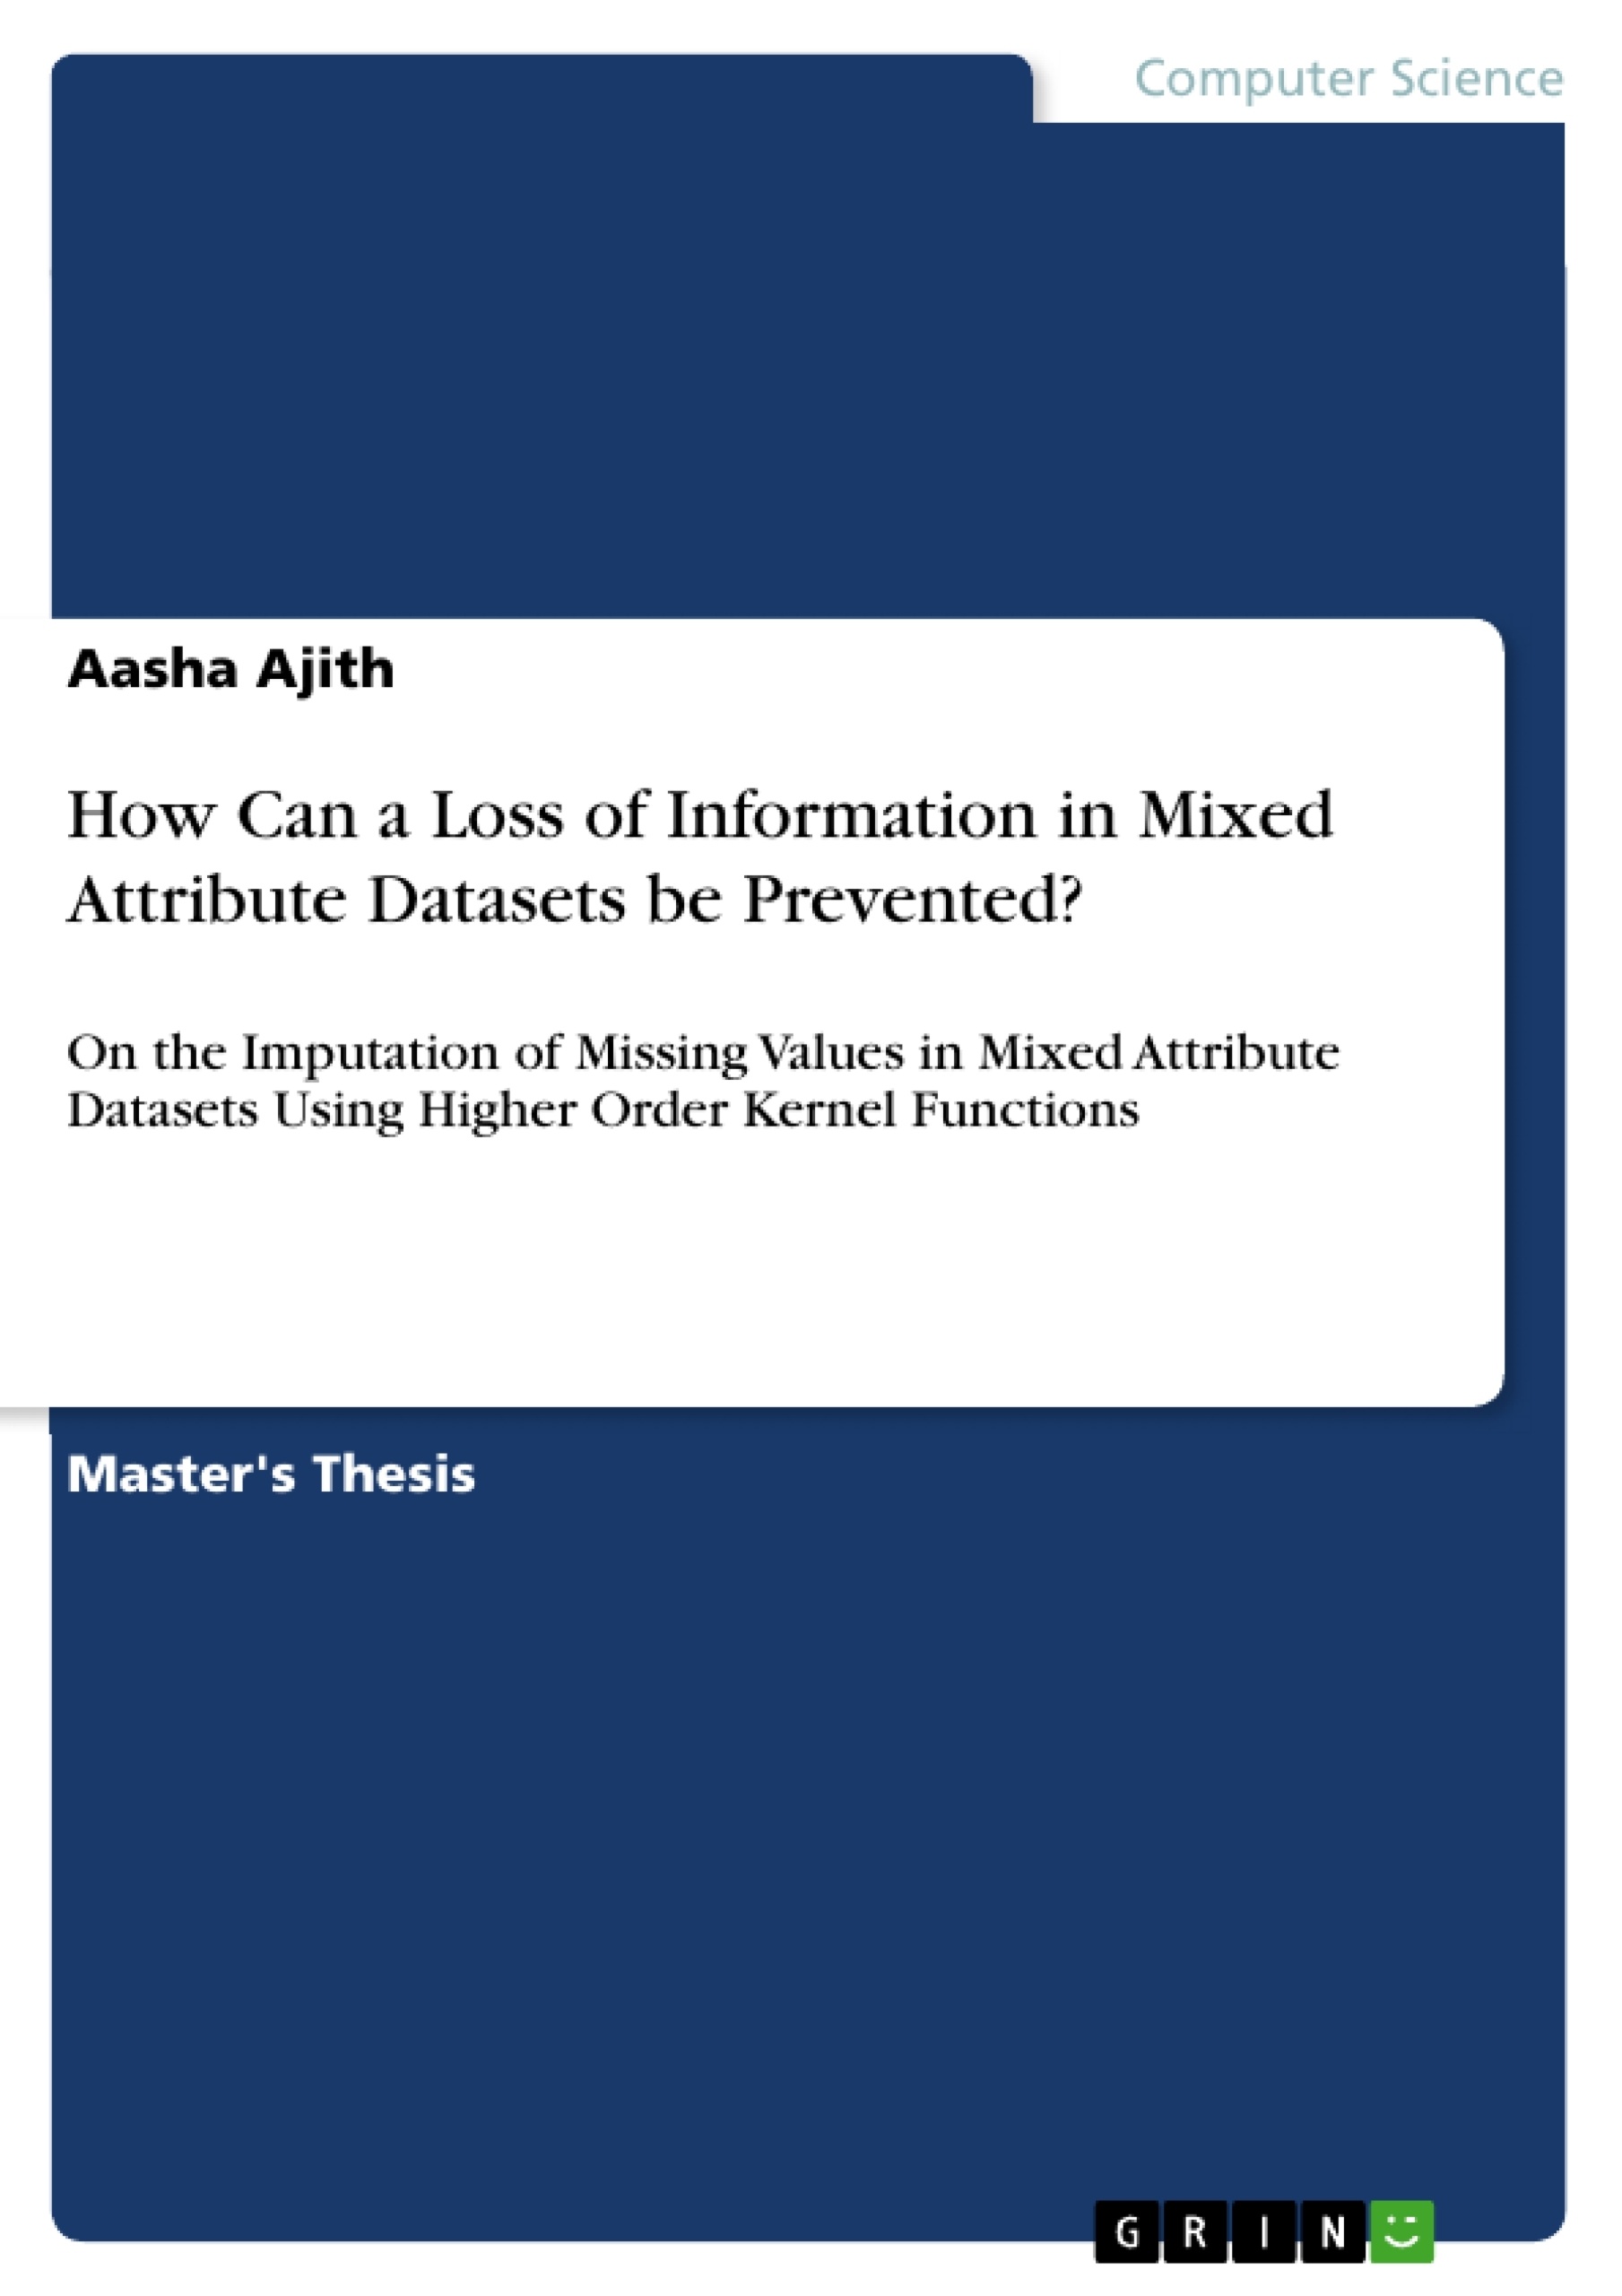 Title: How Can a Loss of Information in Mixed Attribute Datasets be Prevented?